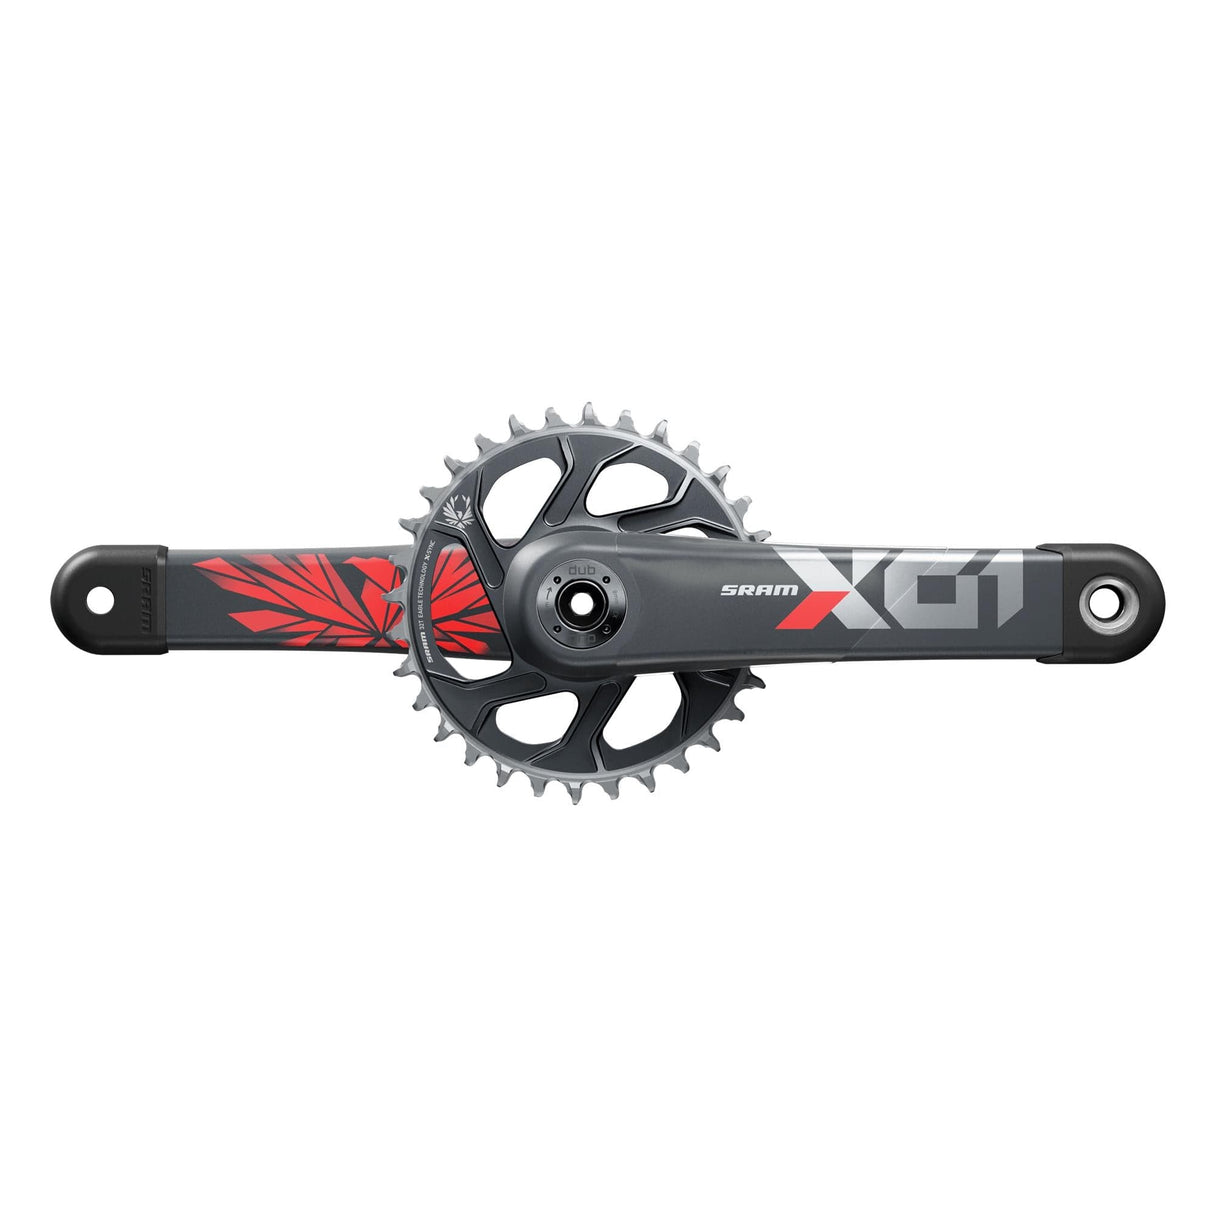 Sram Crankset X01 Eagle Boost 148 Dub 12S W Direct Mount 32T X-Sync 2 Chainring (Dub Cups/Bearings Not Included) C3: Lunar Oxy 175Mm